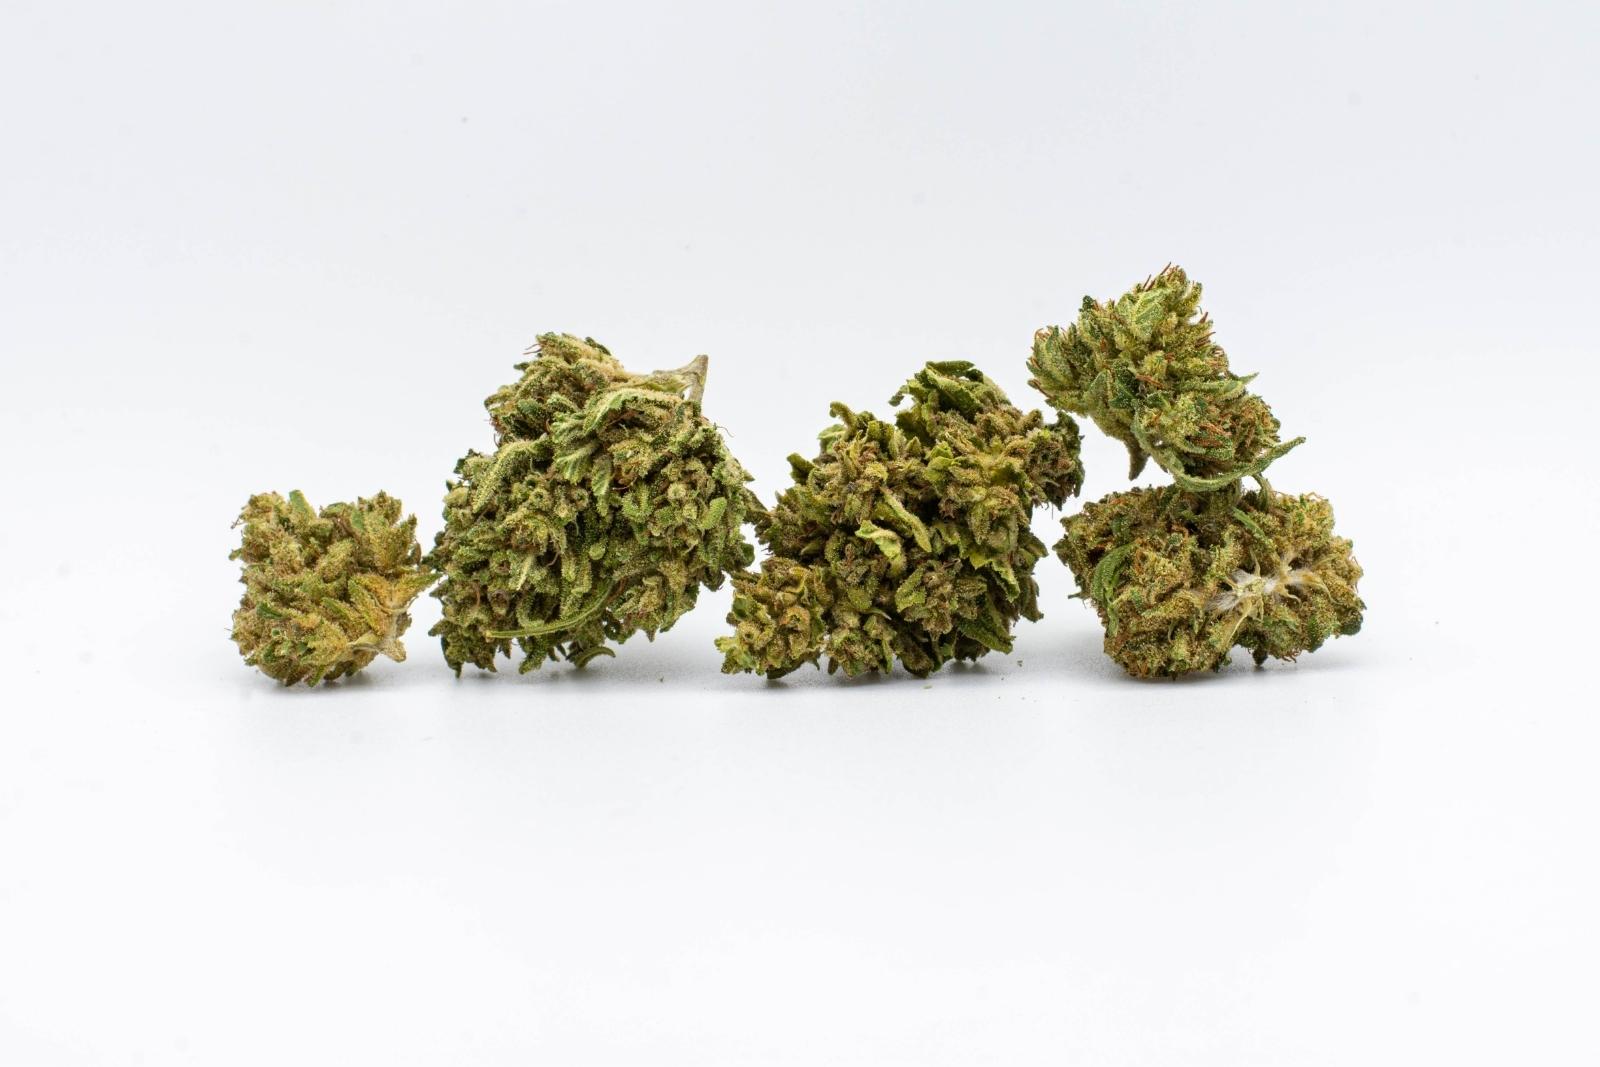 A group of Sour Pineapple hemp flower nugs by East Fork Cultivars, on a white background